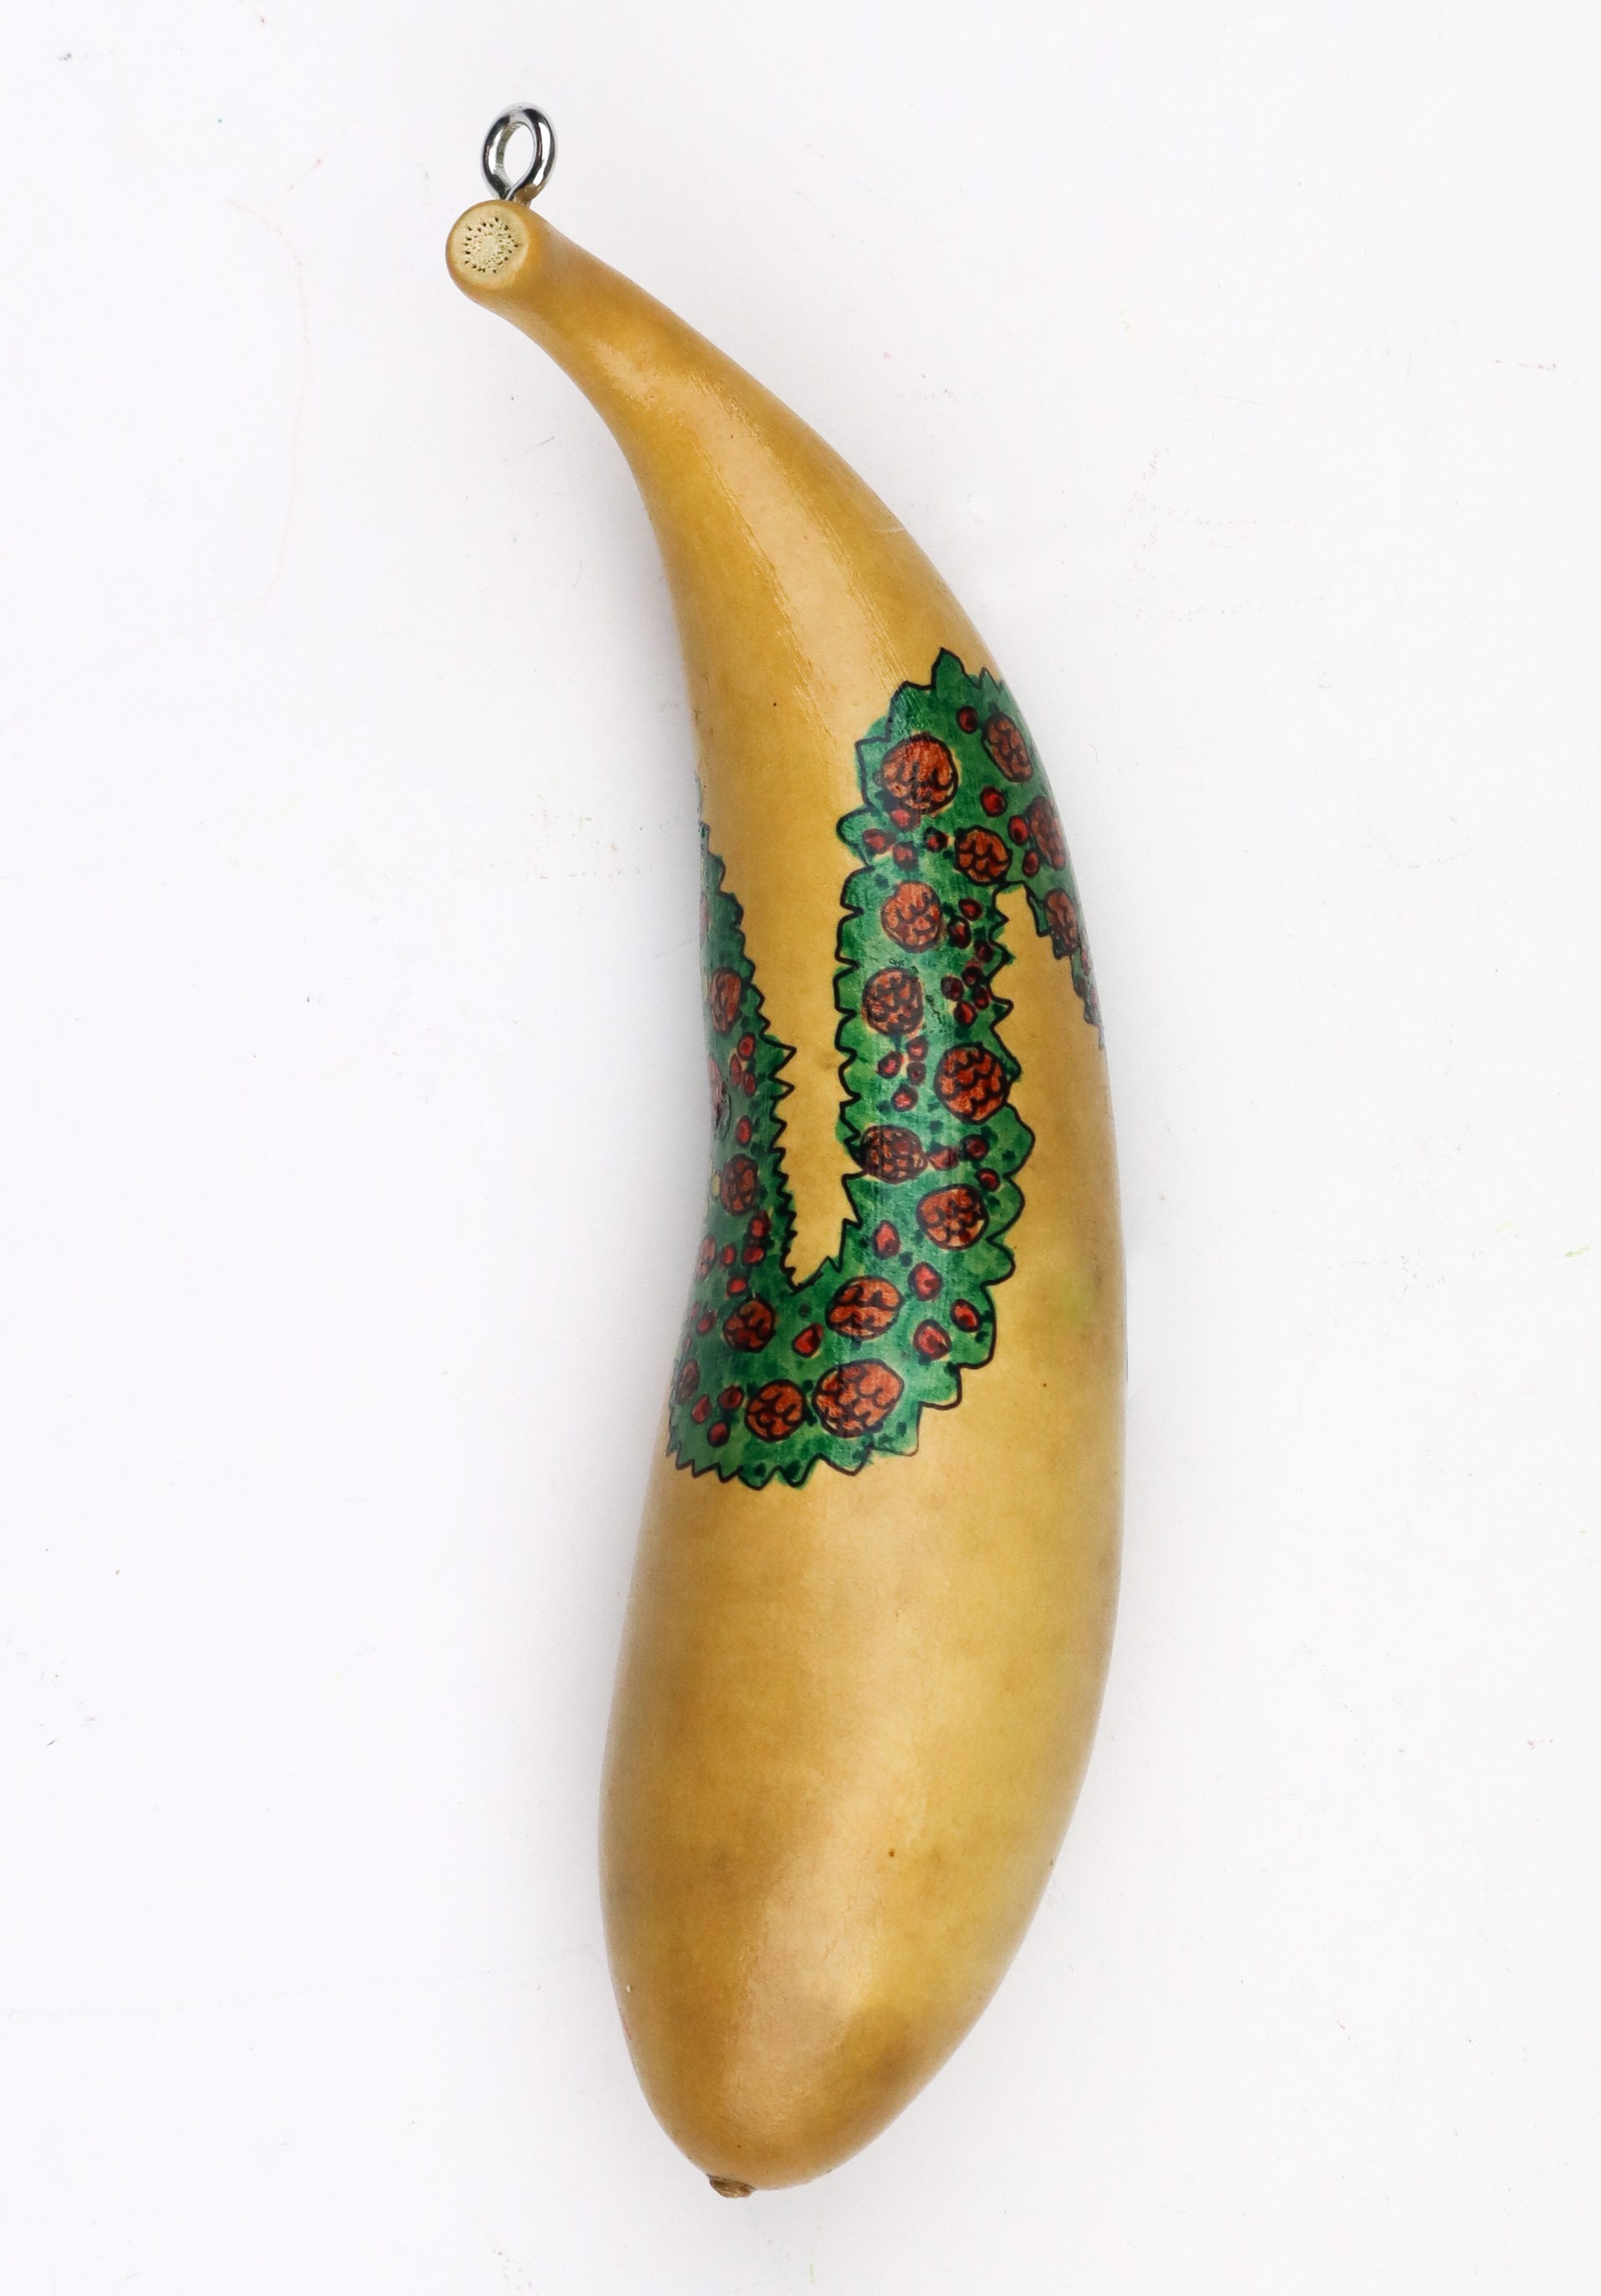 Garland (gourd ornament) by Jacqueline Coleman